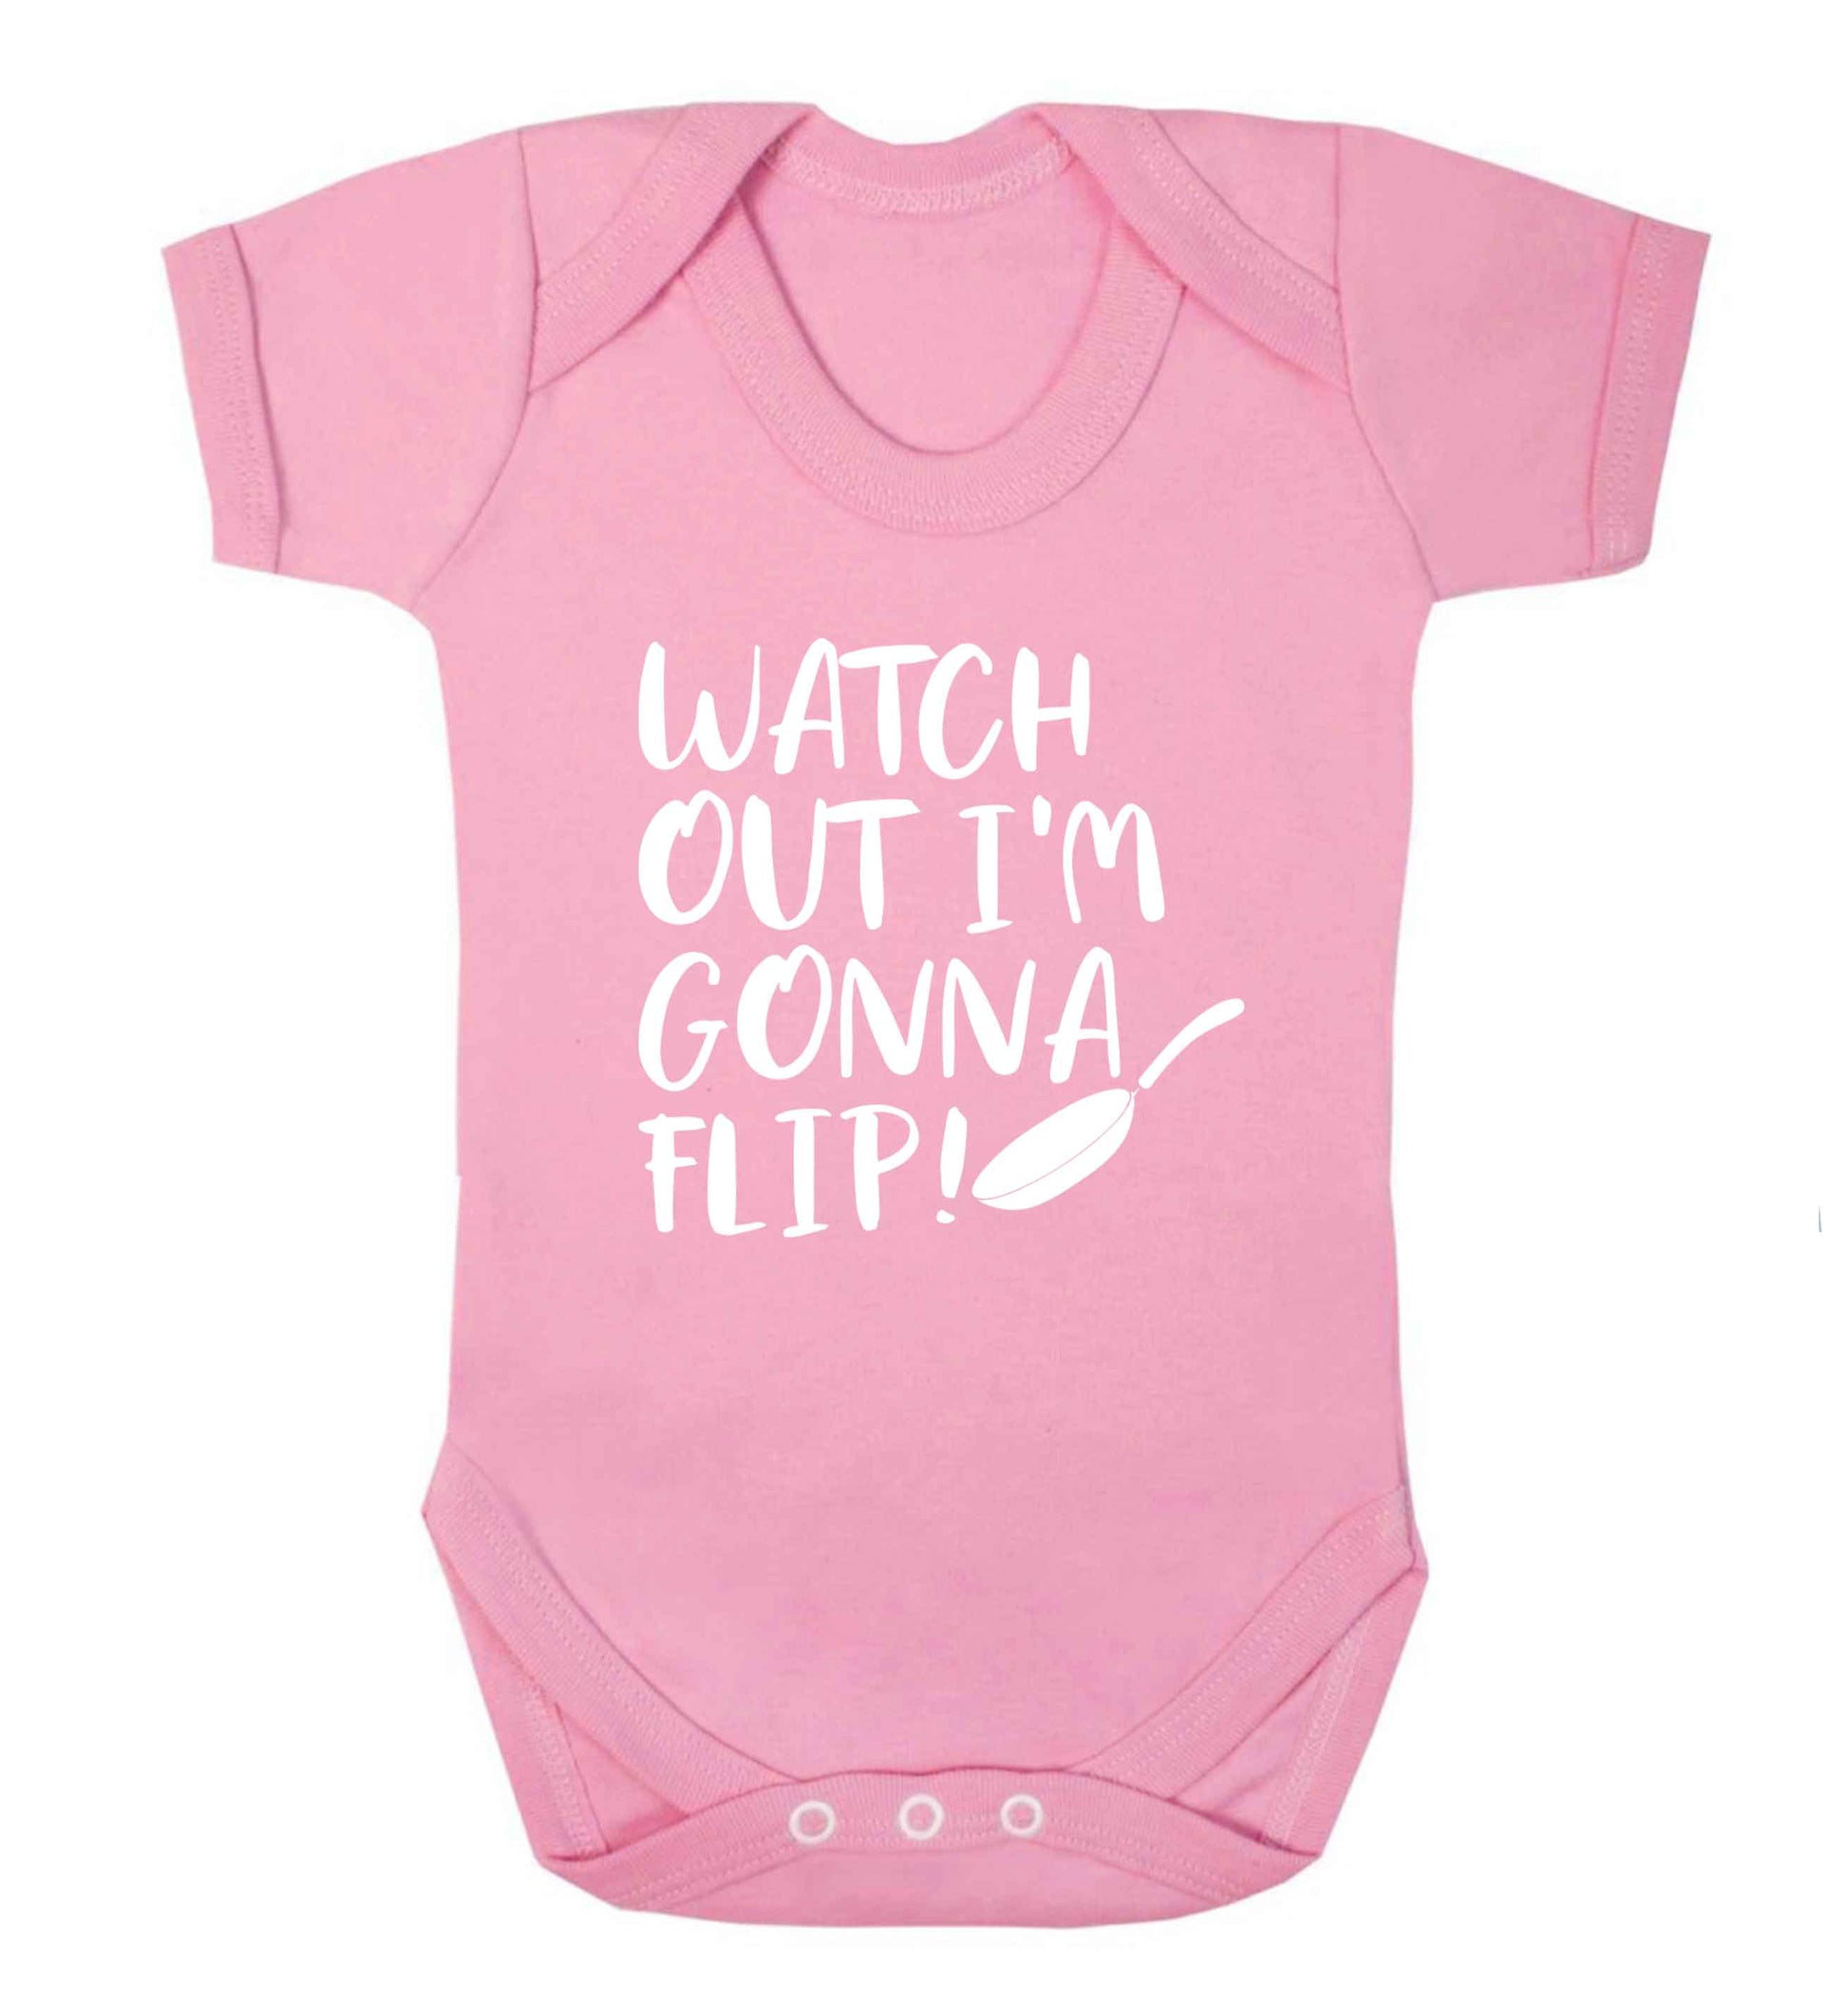 Watch out I'm gonna flip! baby vest pale pink 18-24 months